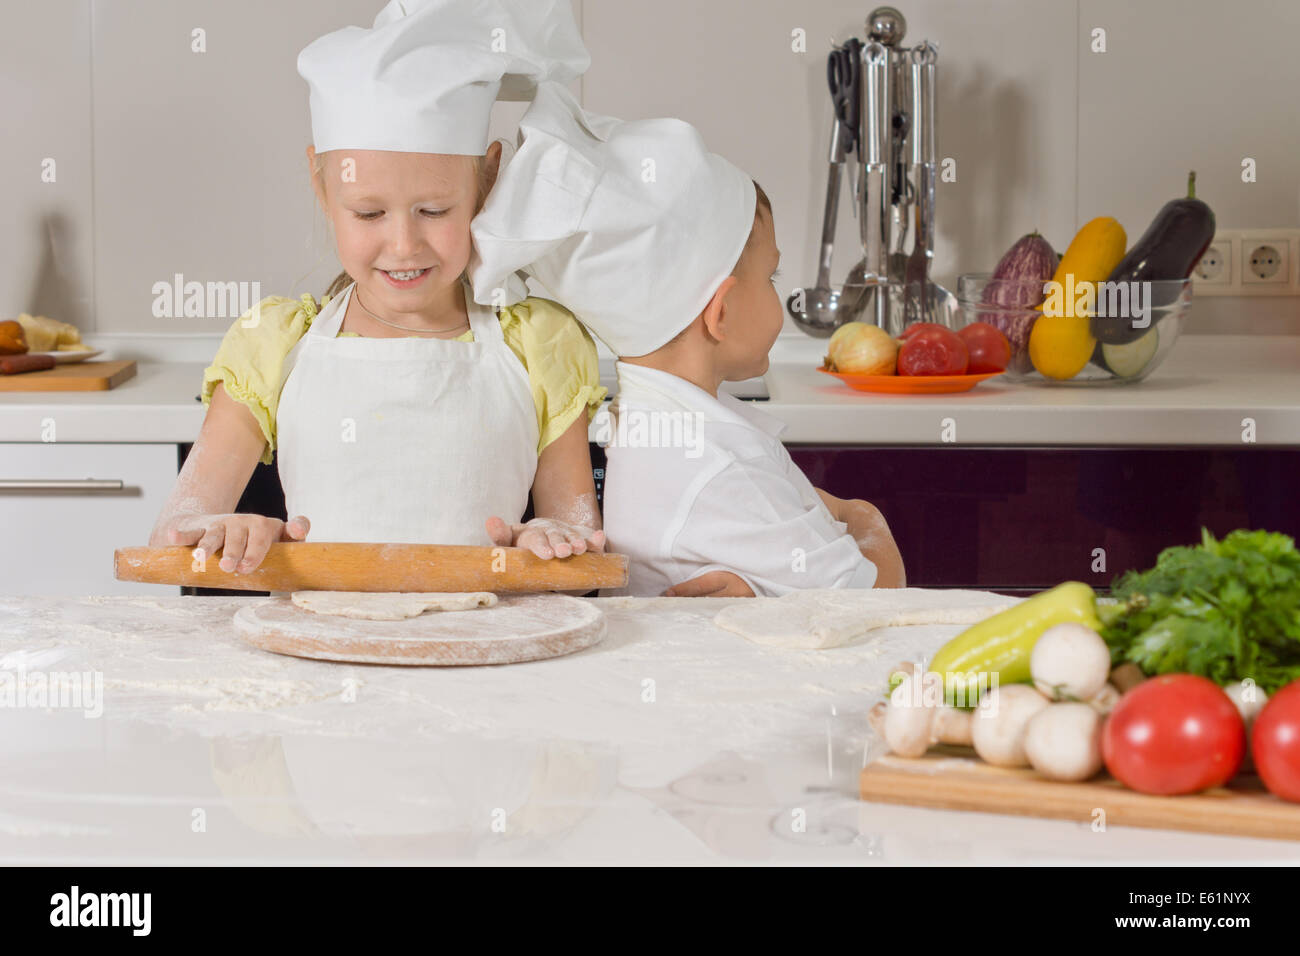 Cute little girl learning to bake in her cooks uniform standing at the kitchen counter rolling out dough with a rolling pin Stock Photo